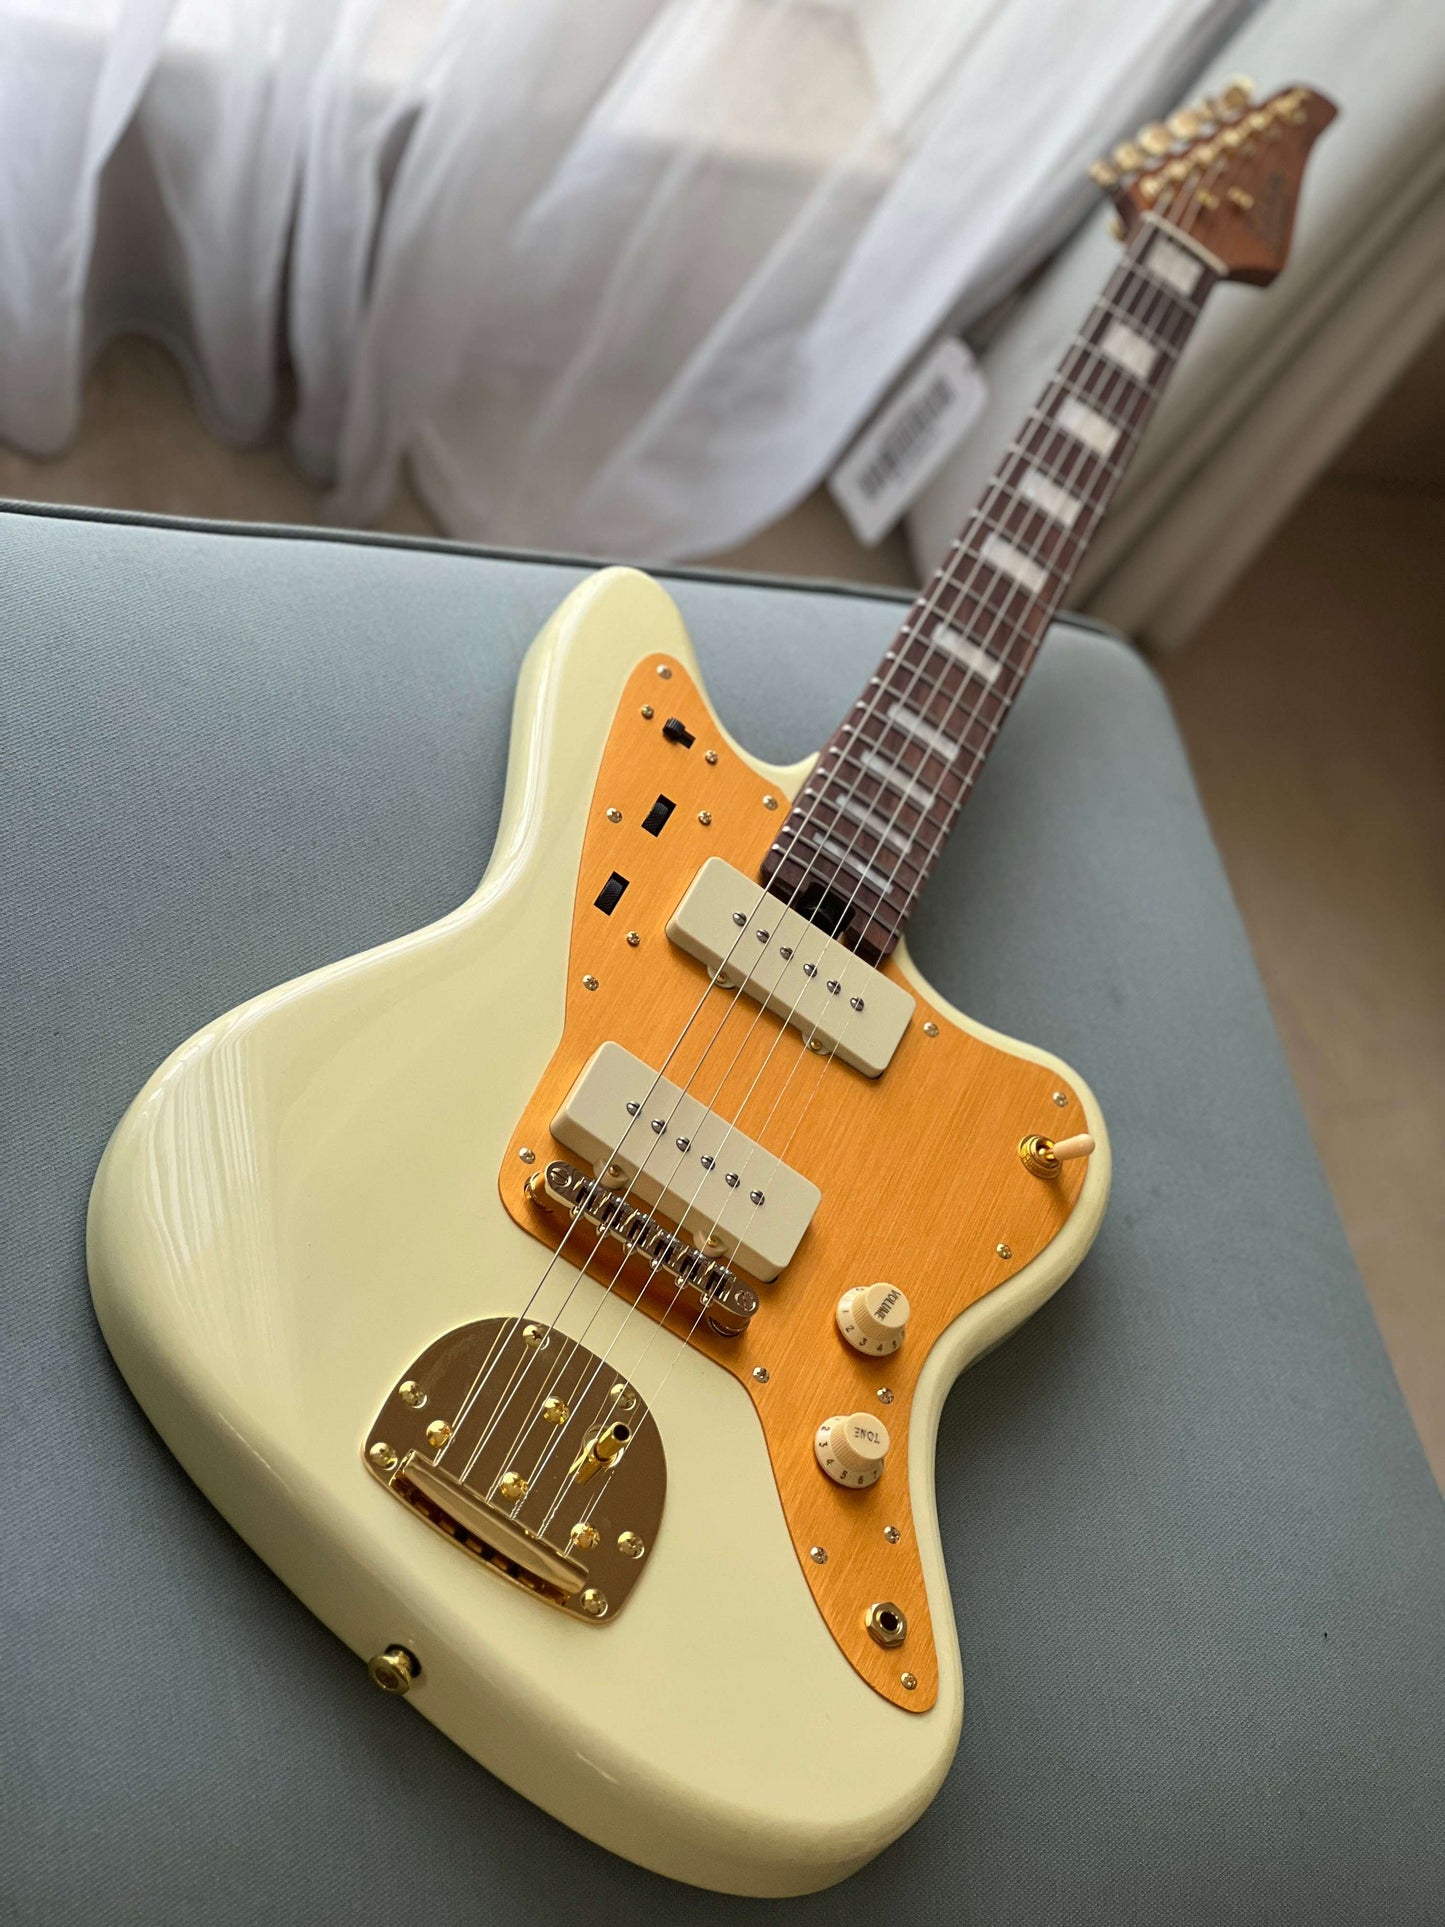 Soloking JM40 Offset Deluxe in Olympic White with Gold Hardware